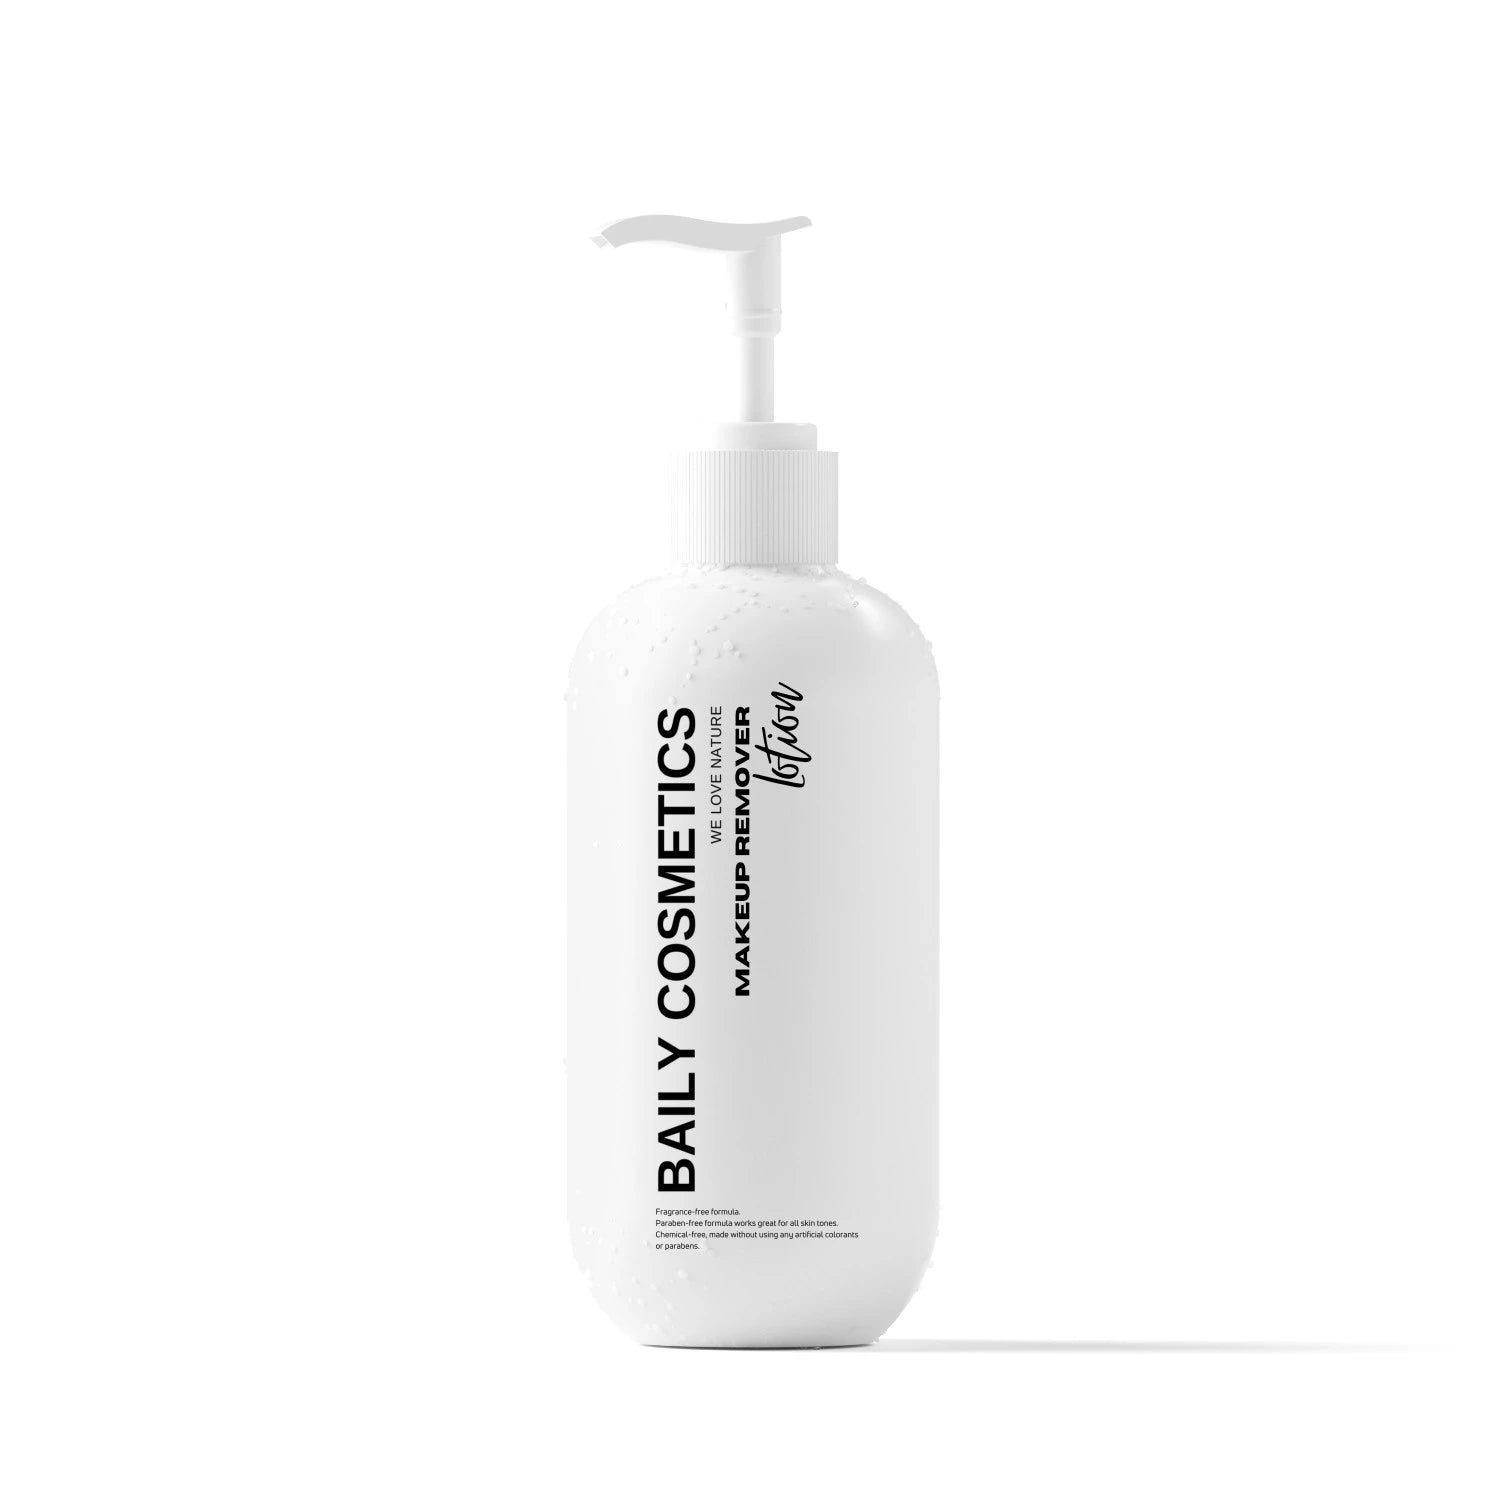 Handcrafted Vegan Beauty - Baily Makeup Remover Lotion for Gentle Makeup Cleansing